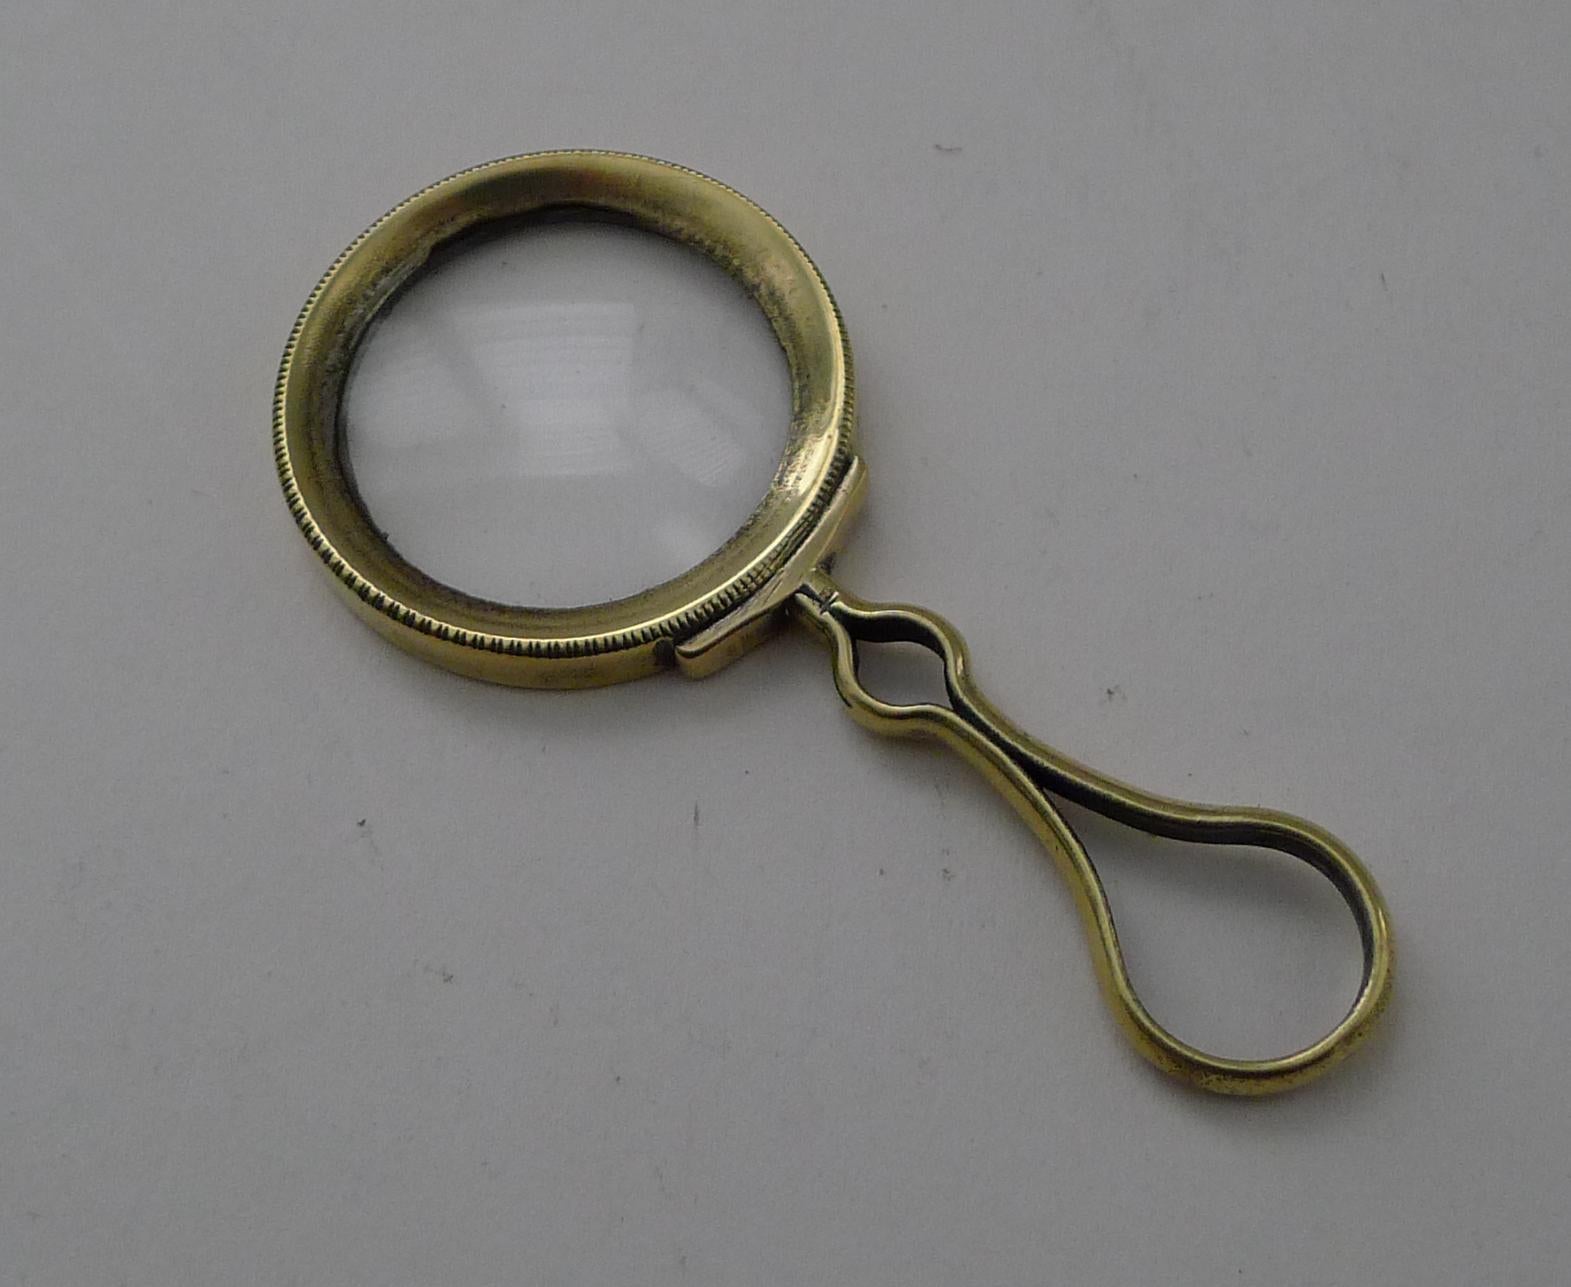 A small antique English magnifying glass with a polished brass handle and frame.  The glass has a good magnification and remains in undamaged condition.

Dating to c.1900, it remains in excellent condition measuring 2 7/8